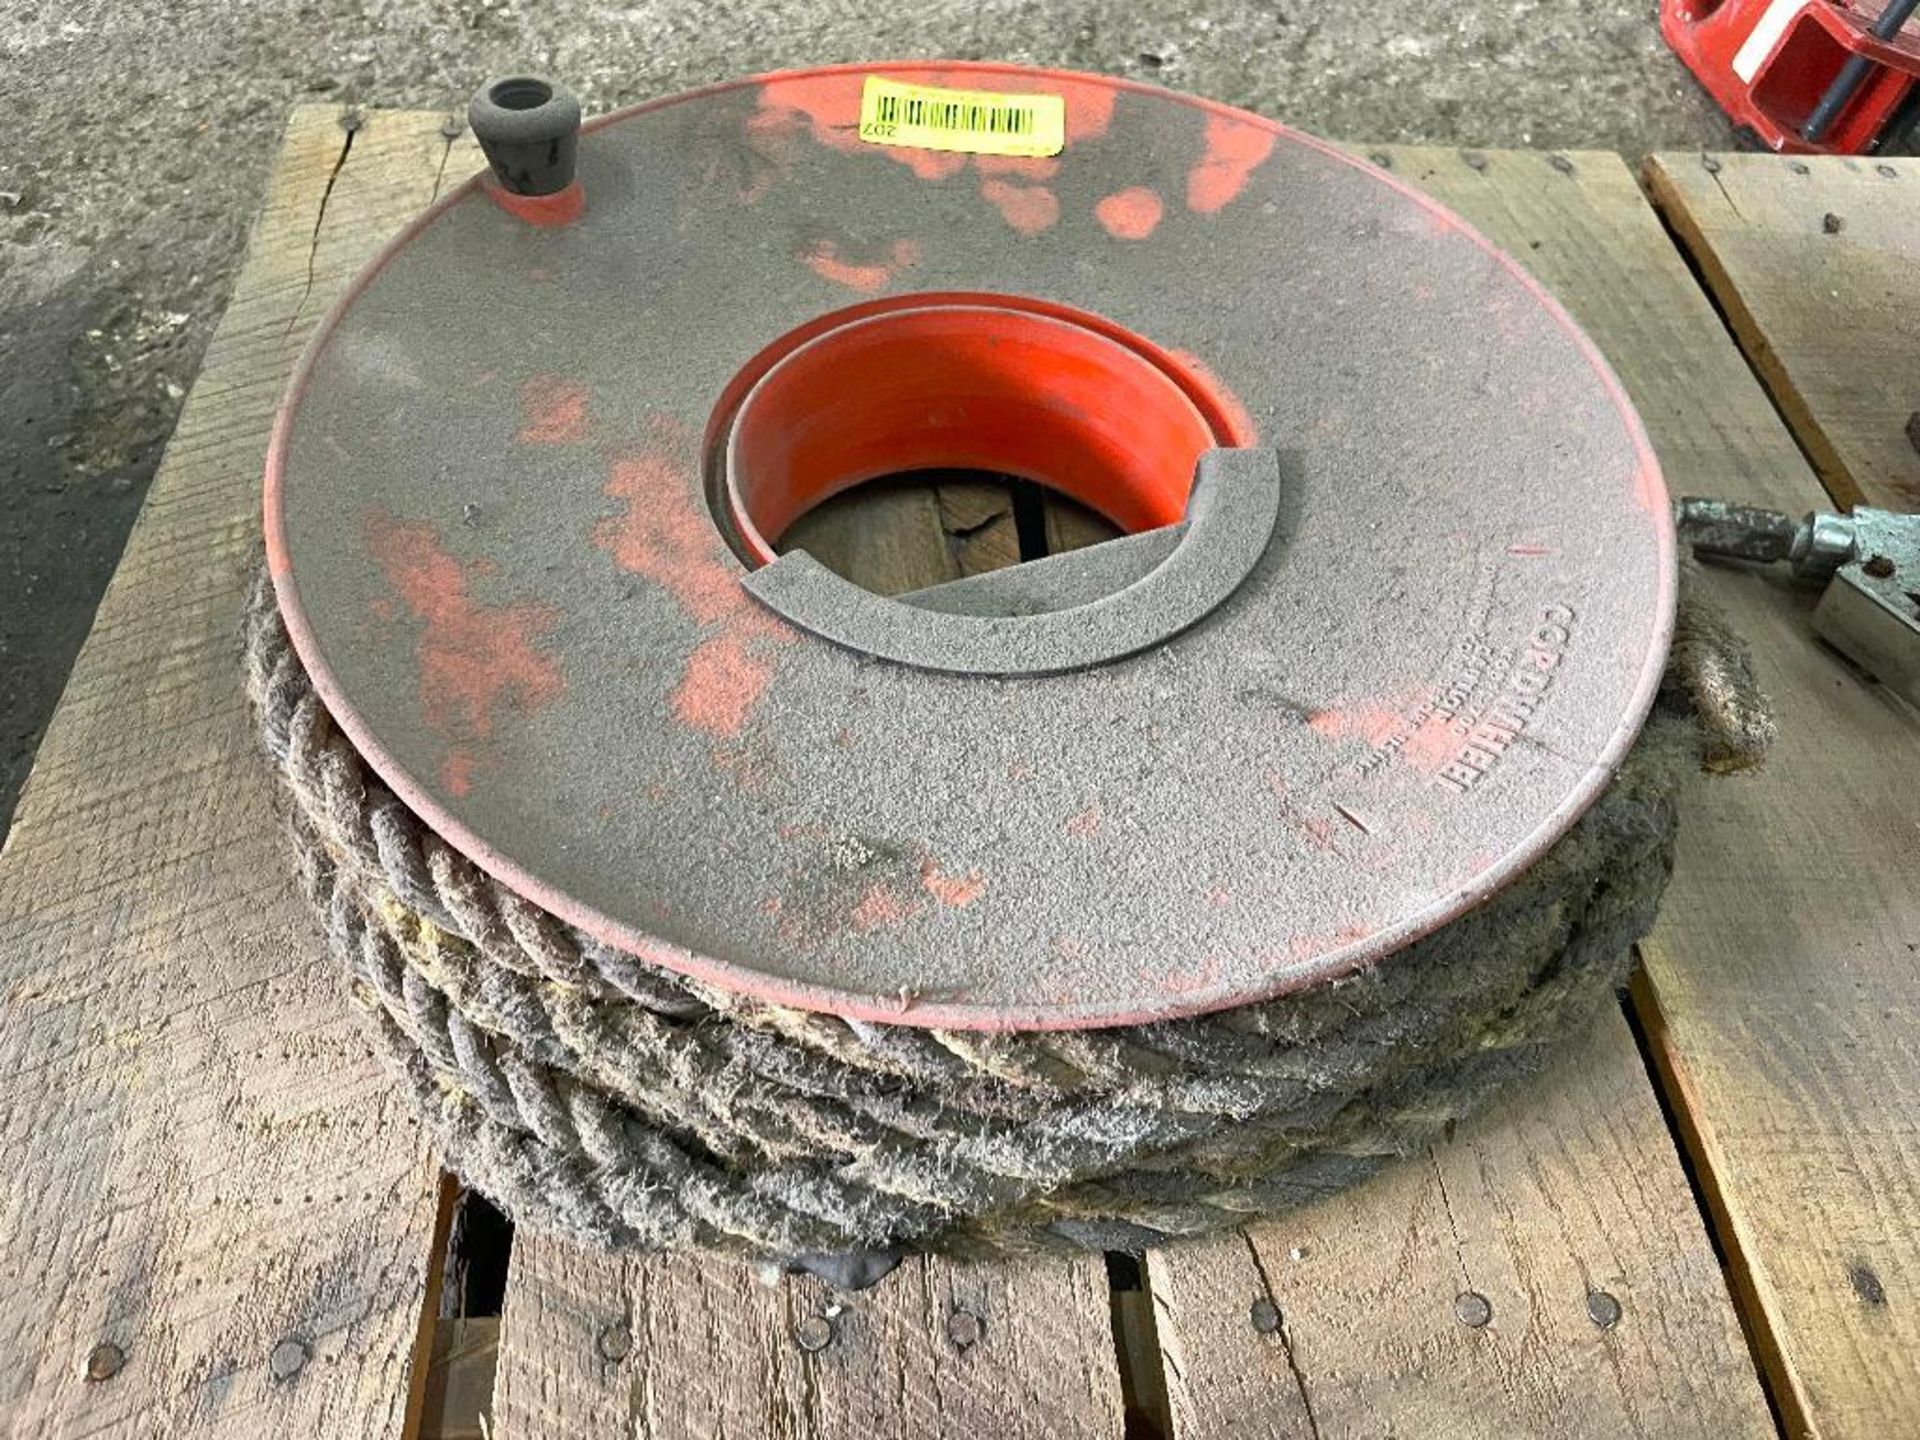 DESCRIPTION: PLASTIC REEL AND 1/2" NYLON ROPE. APPROX 30' LOCATION: SHOP QTY: 1